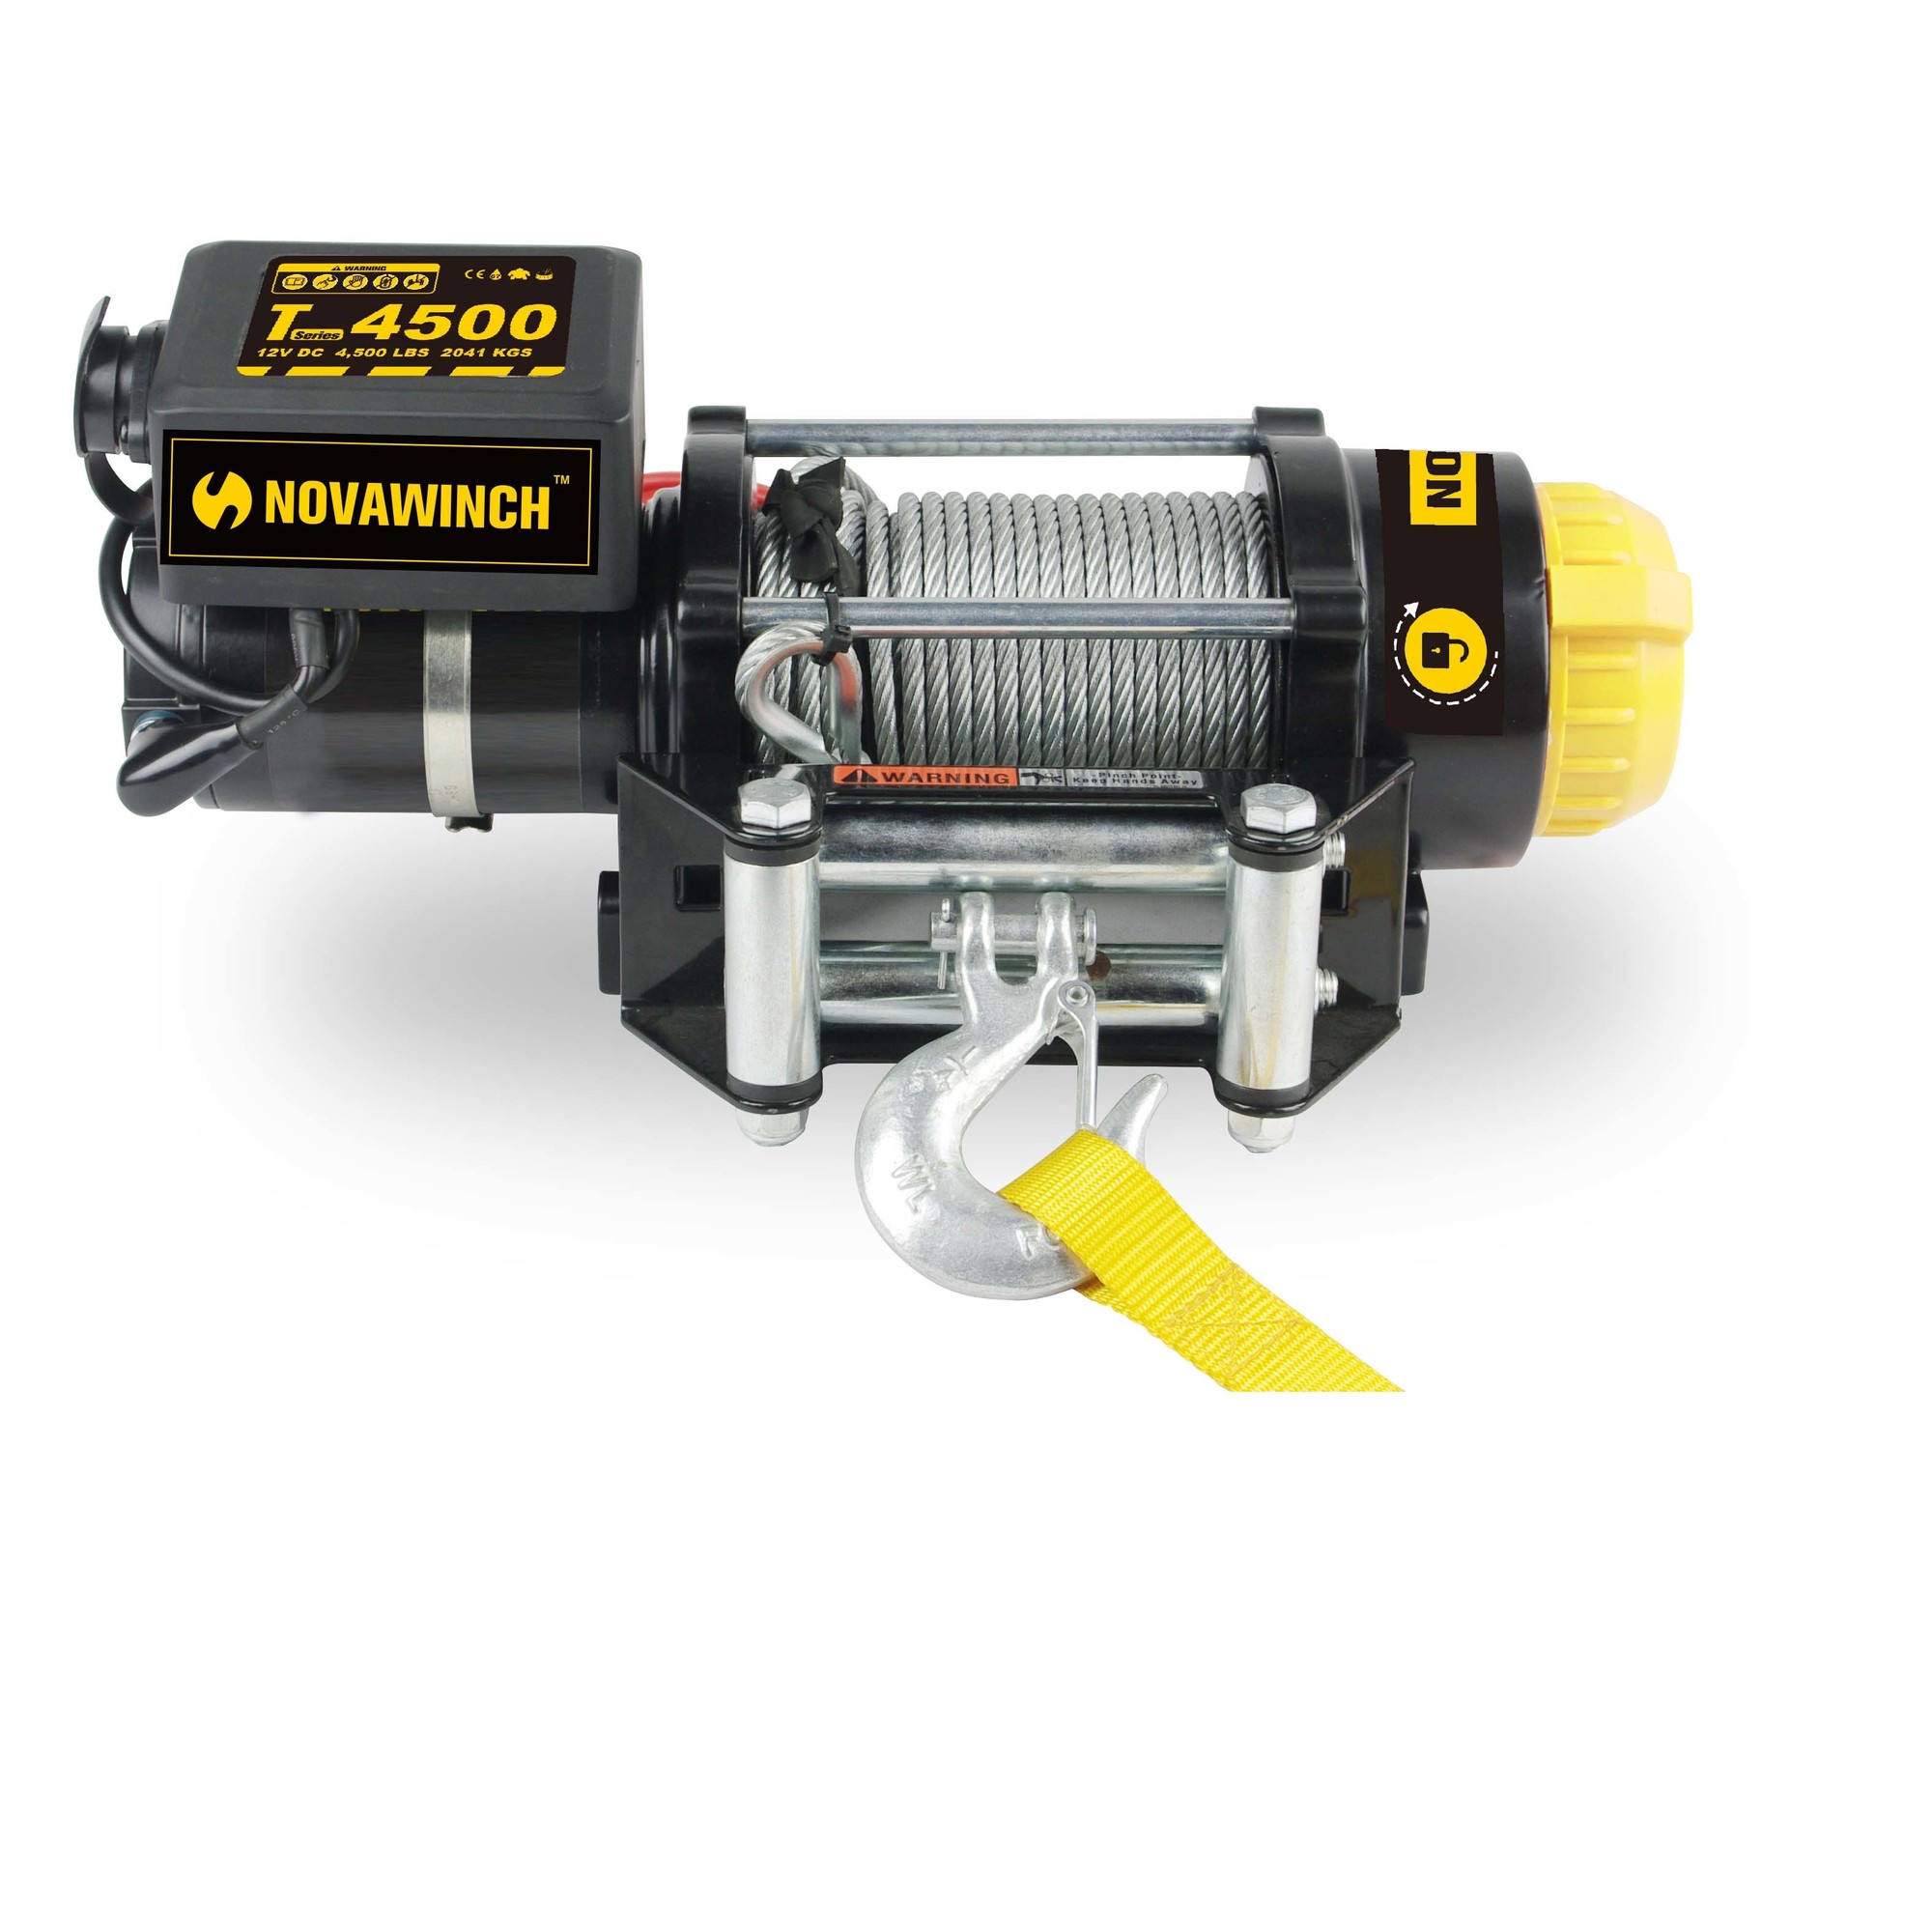 Novawinch, Utility 12V DC Powered Winch, Capacity (Line Pull) 4500 lb, Volts 12, Max. Amps 185, Model 701001068535